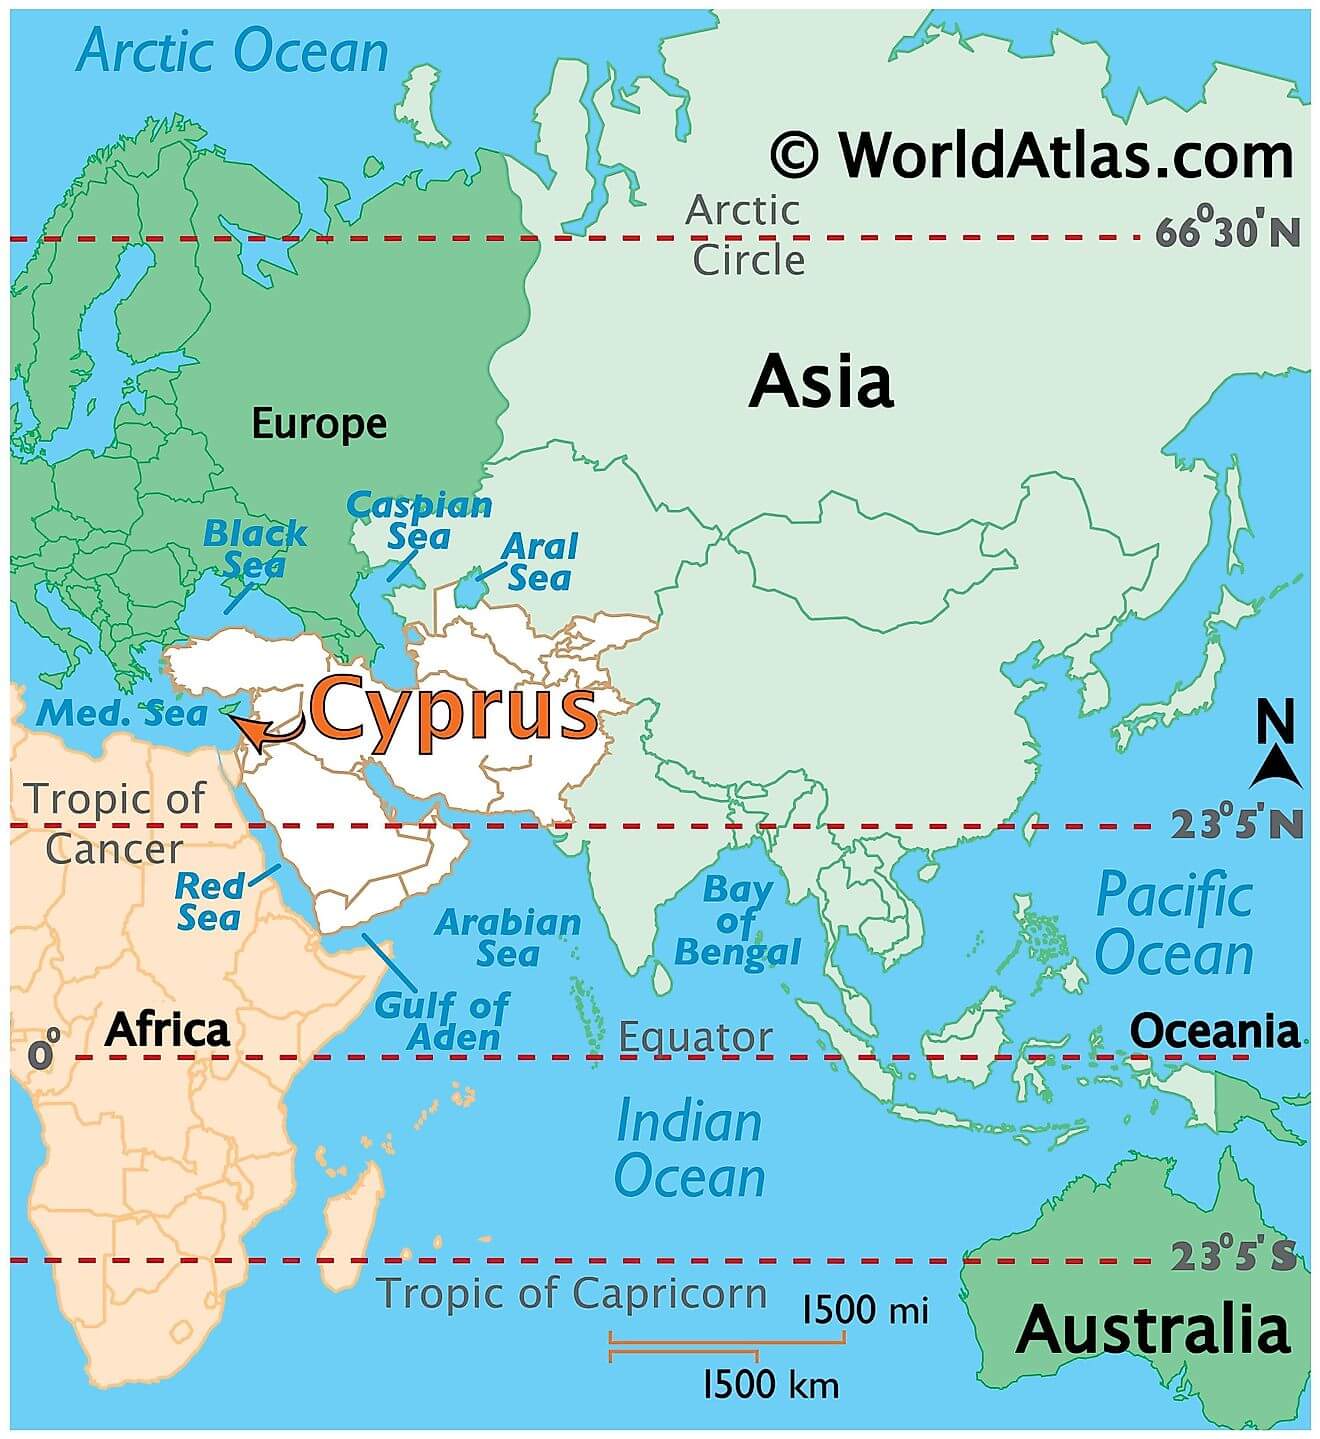 Where is Cyprus?